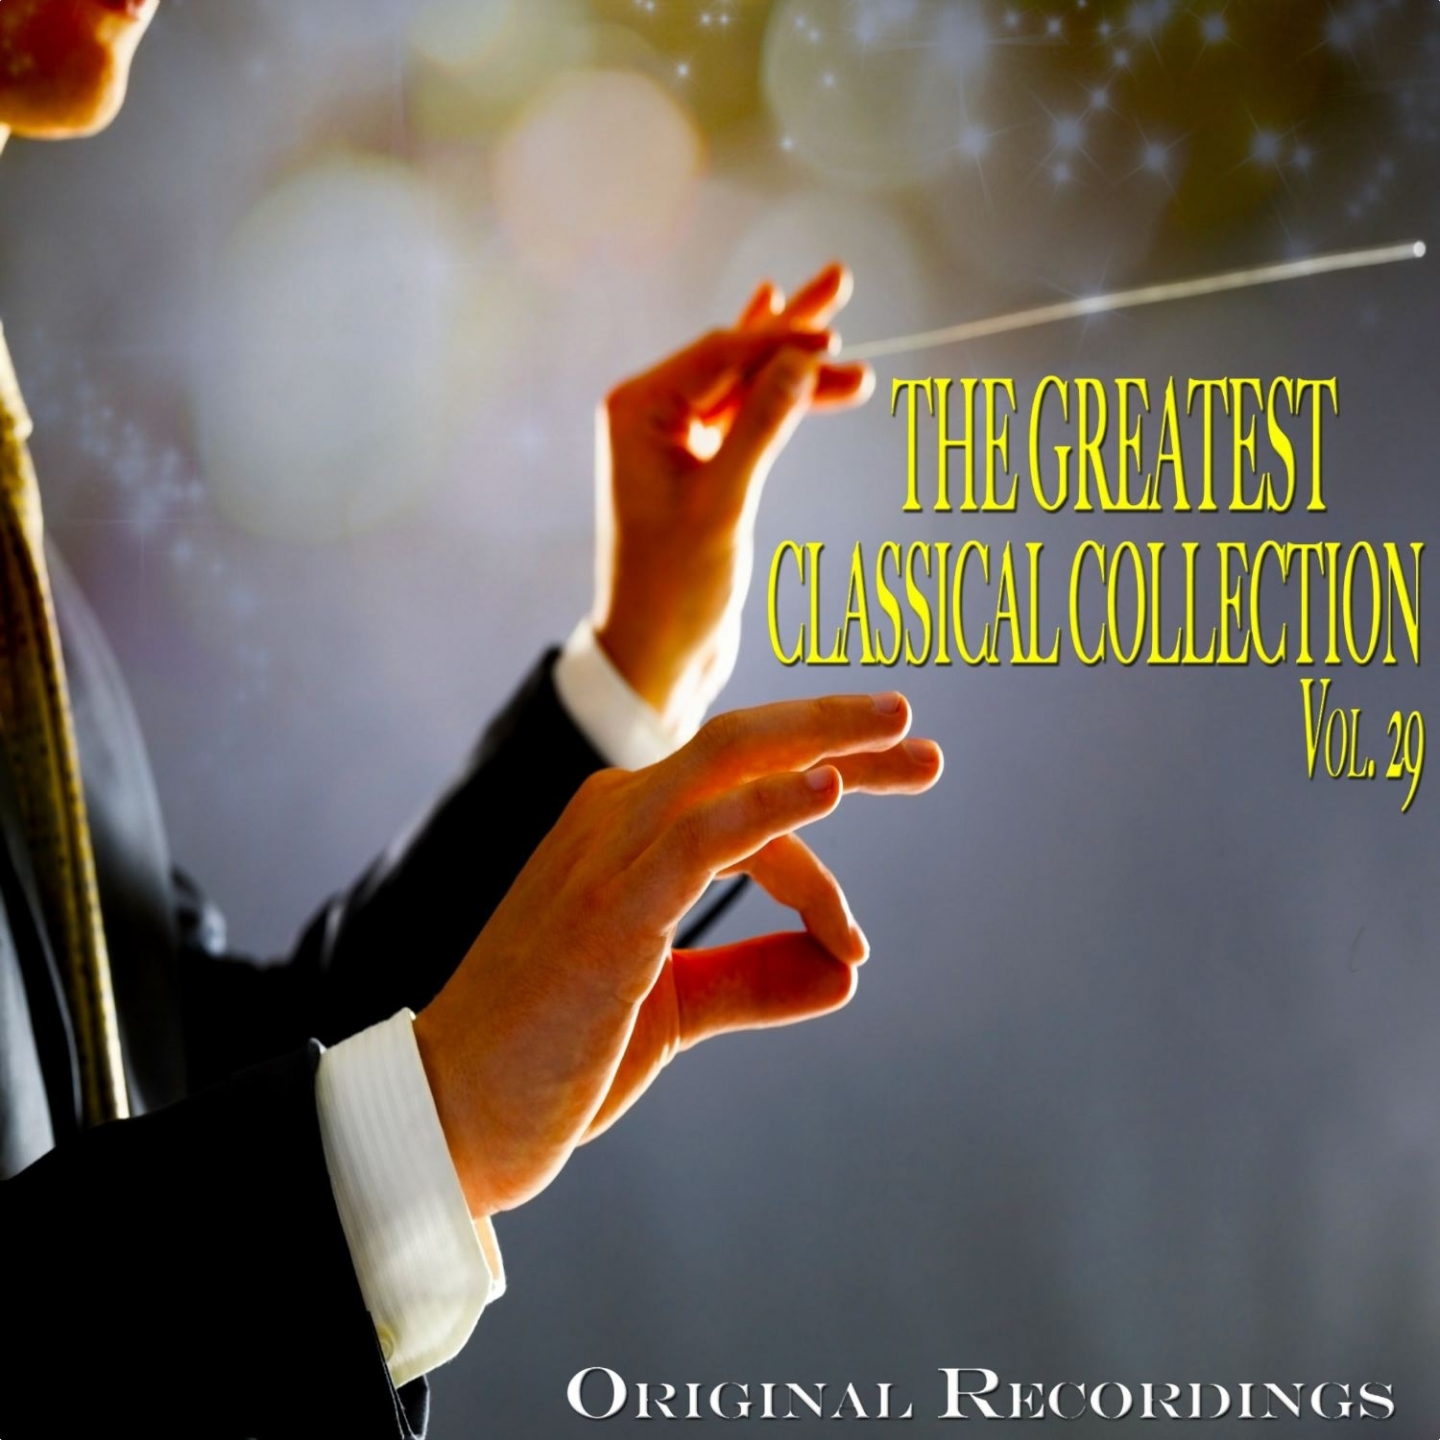 The Greatest Classical Collection Vol. 29